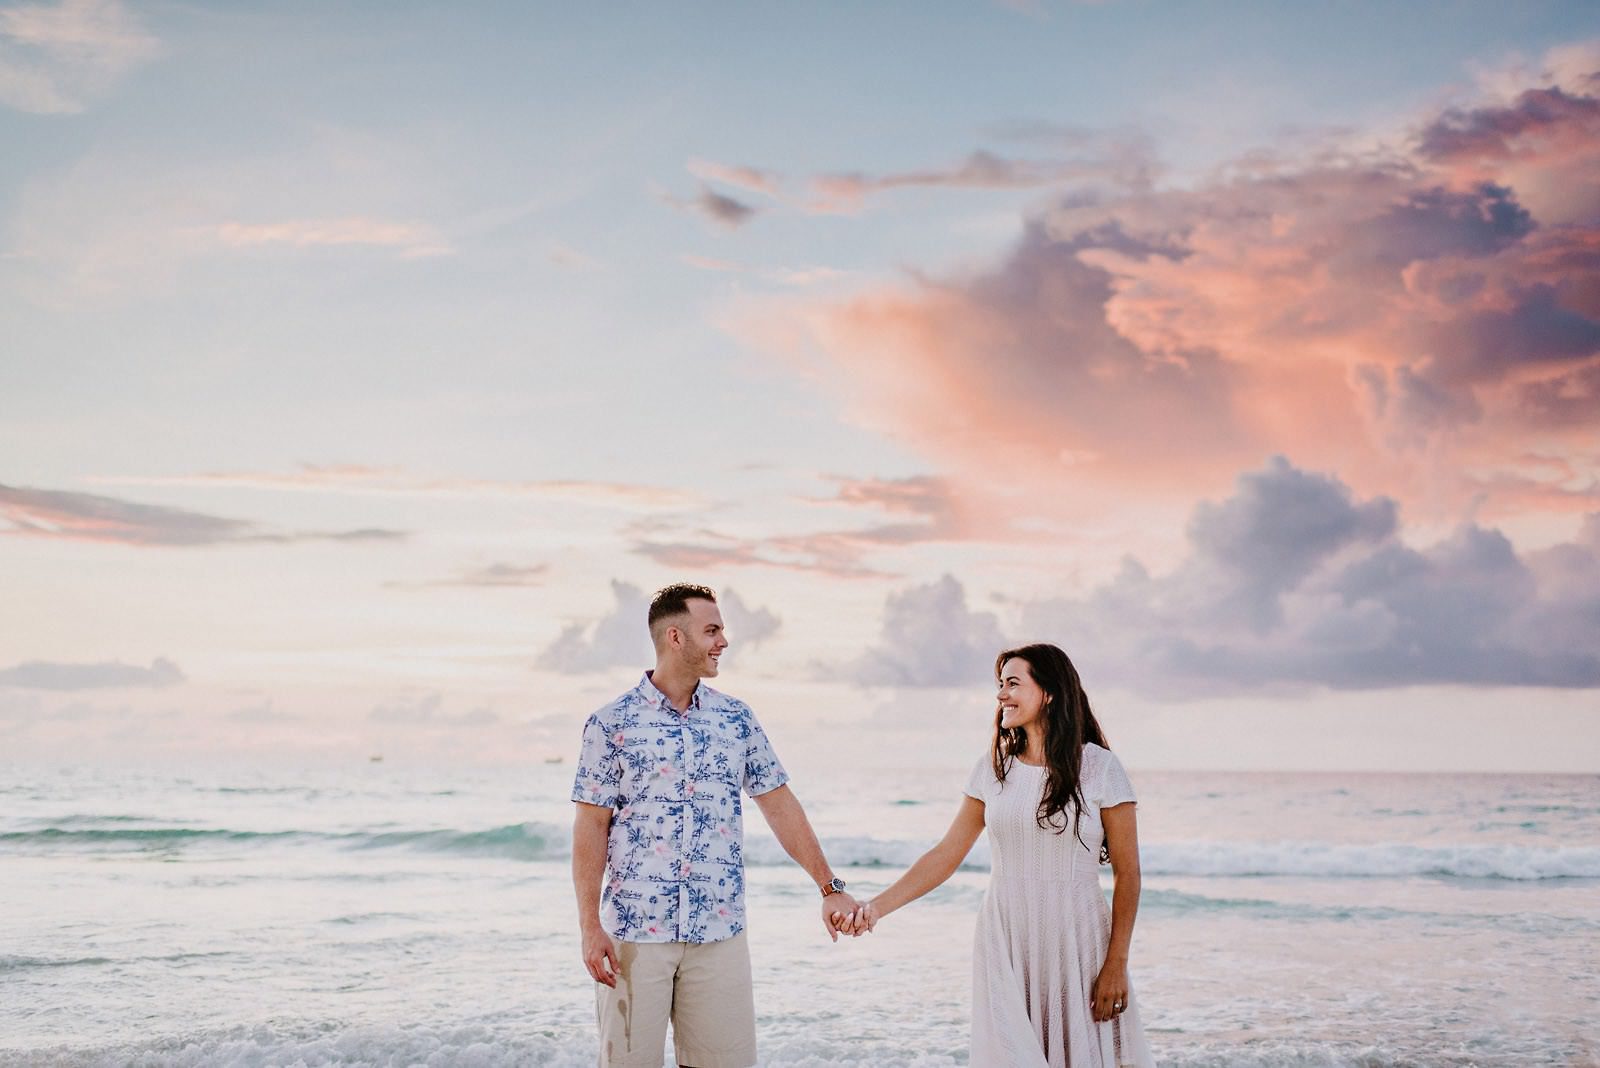 south beach engagement photography evan rich miami0016